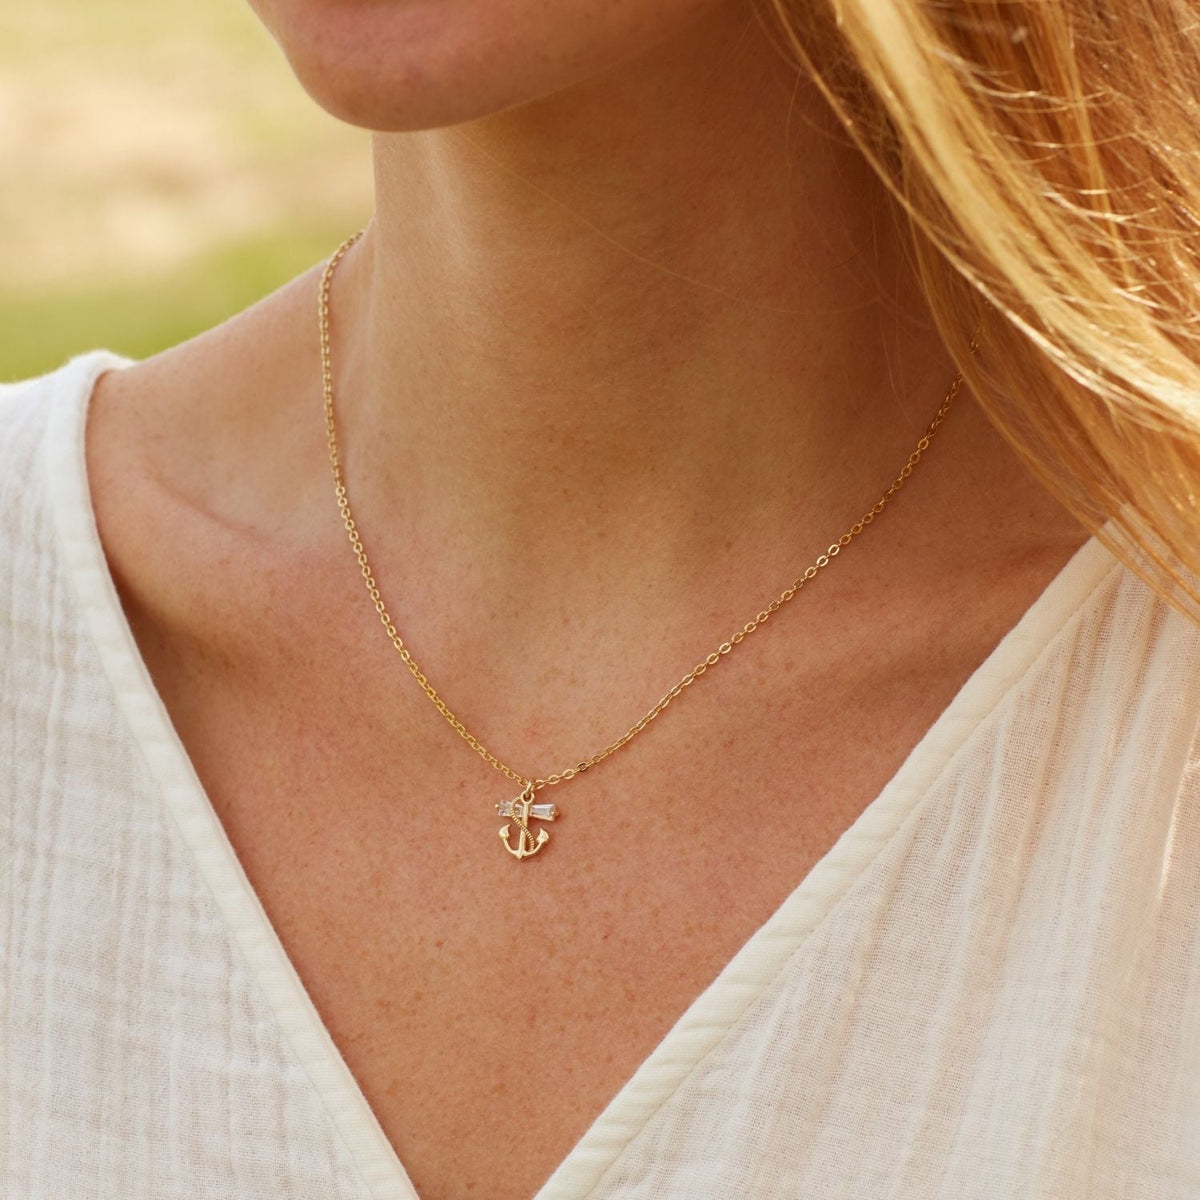 My Aunt | Love That&#39;s Never Ending | Anchor Necklace